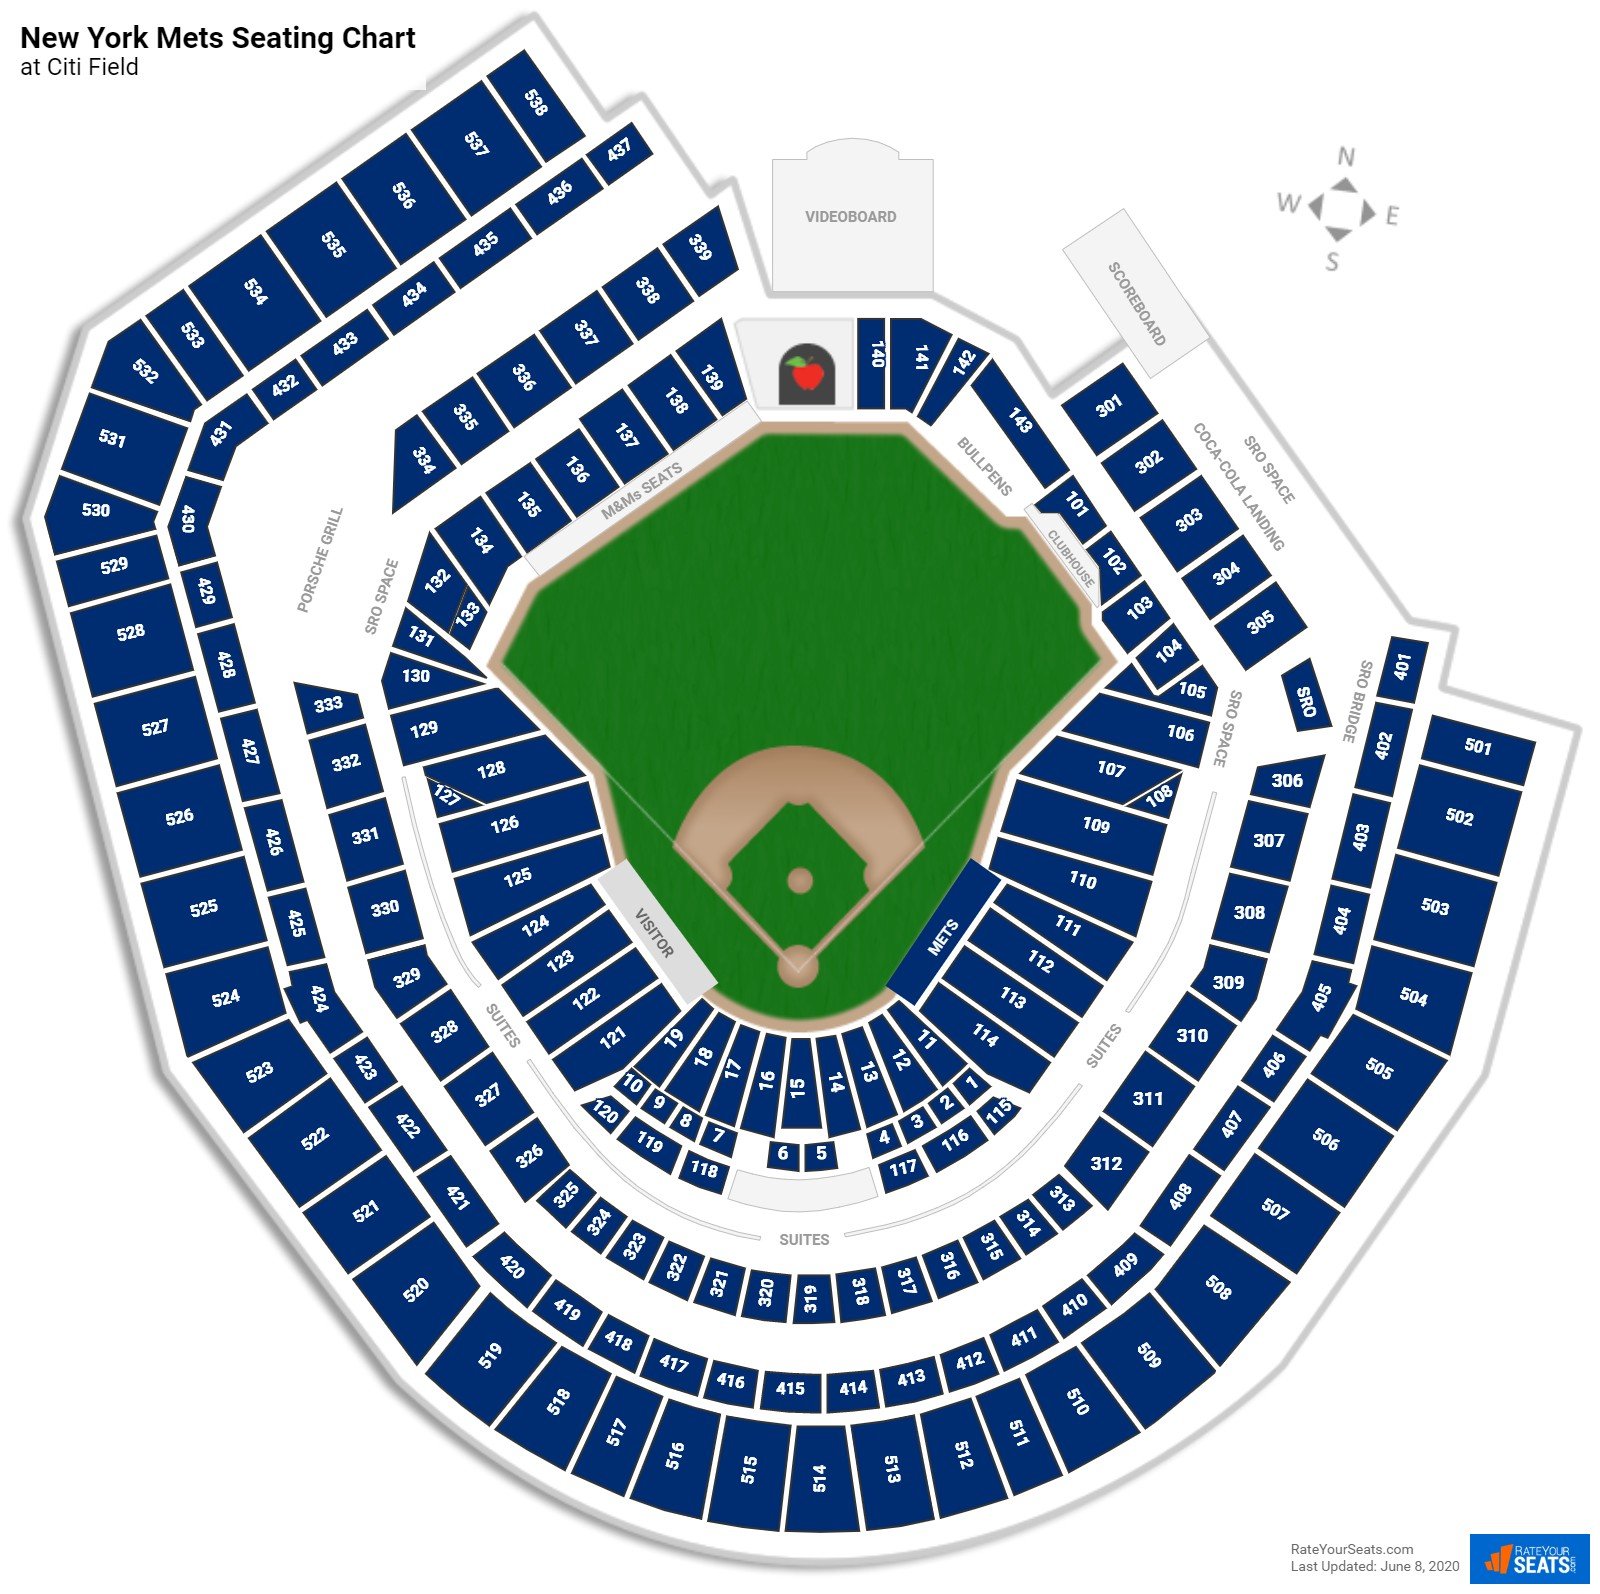 Views Citi Field Section 515. port st mets seating chart convenient but wit...